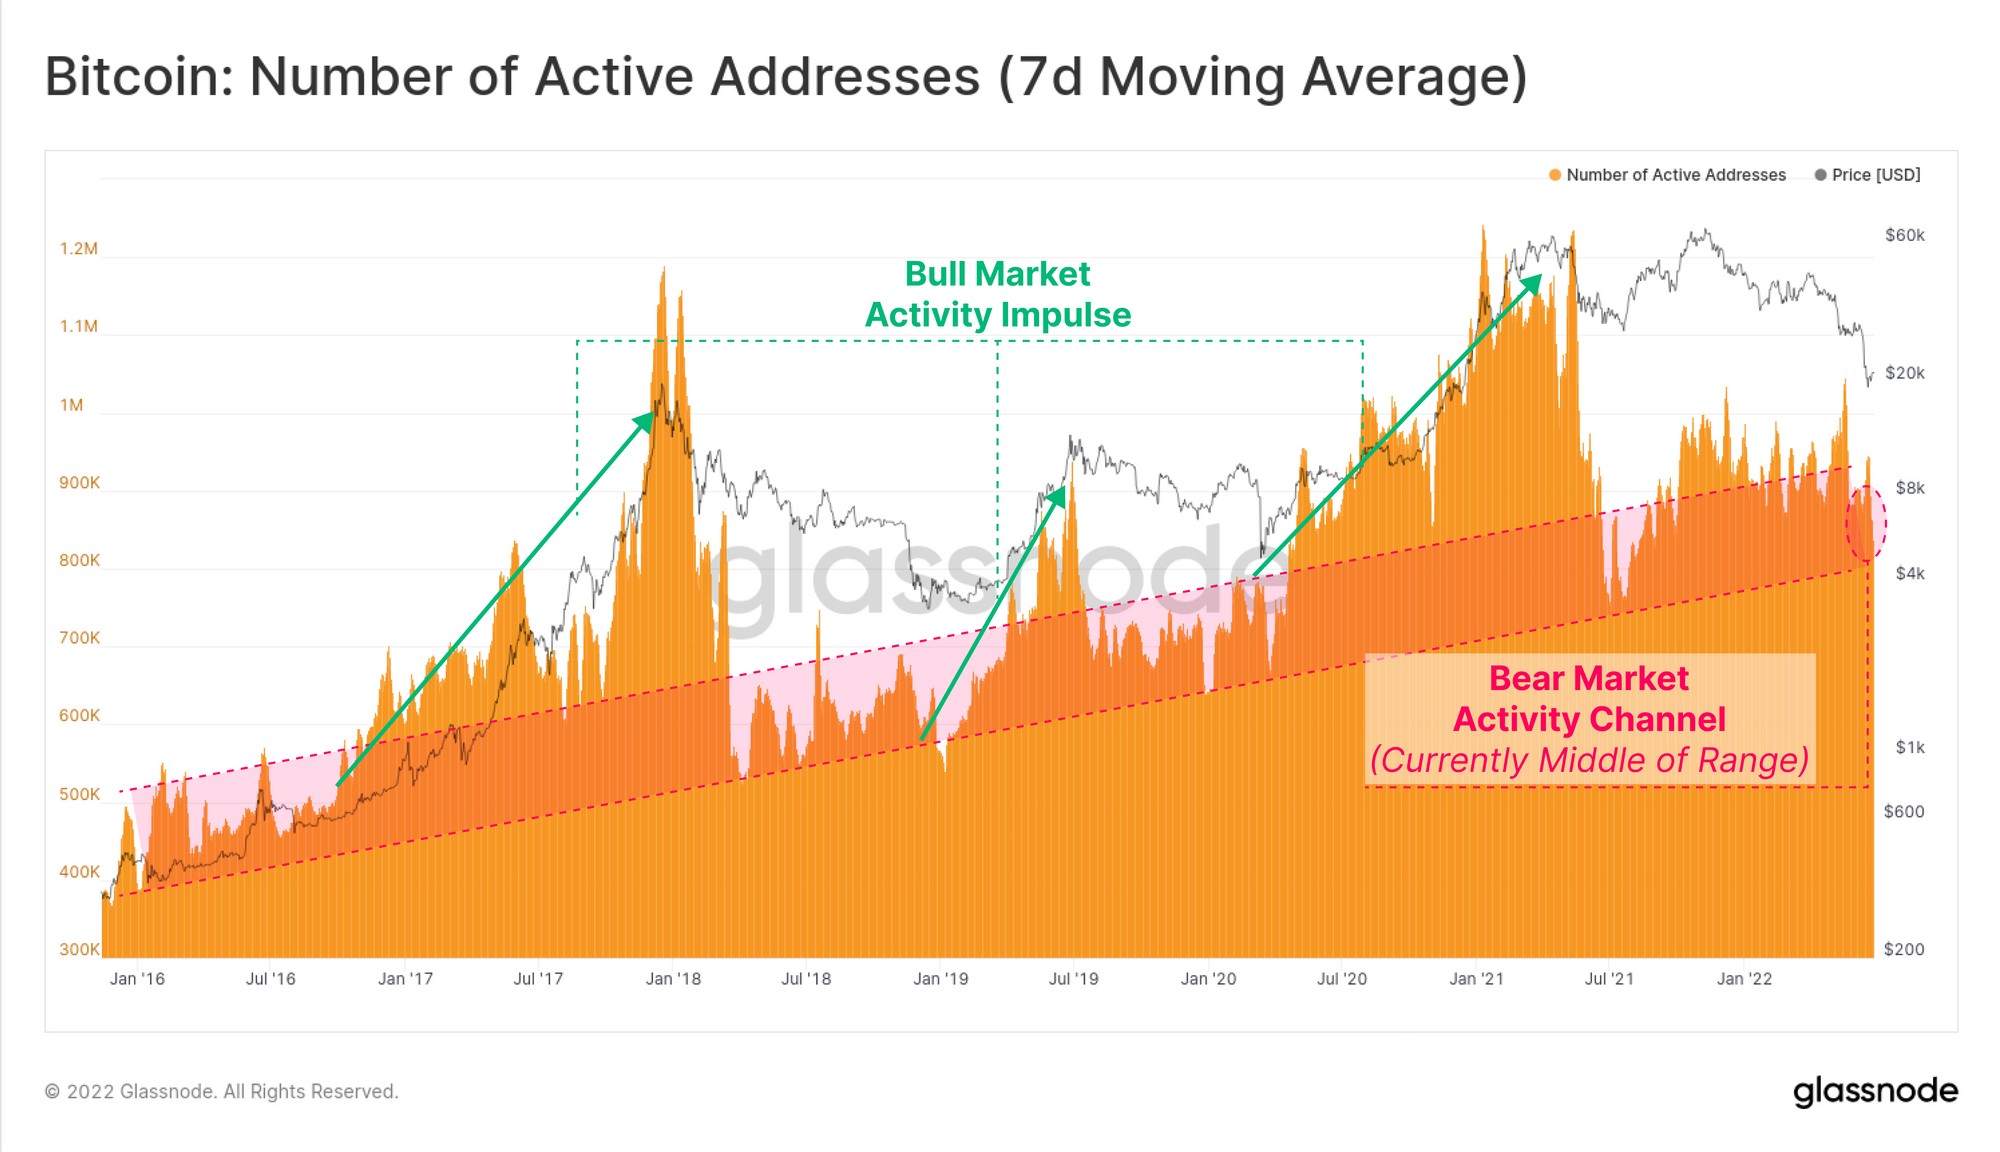 Bitcoin: Number of Active Addresses (7d Moving Average)